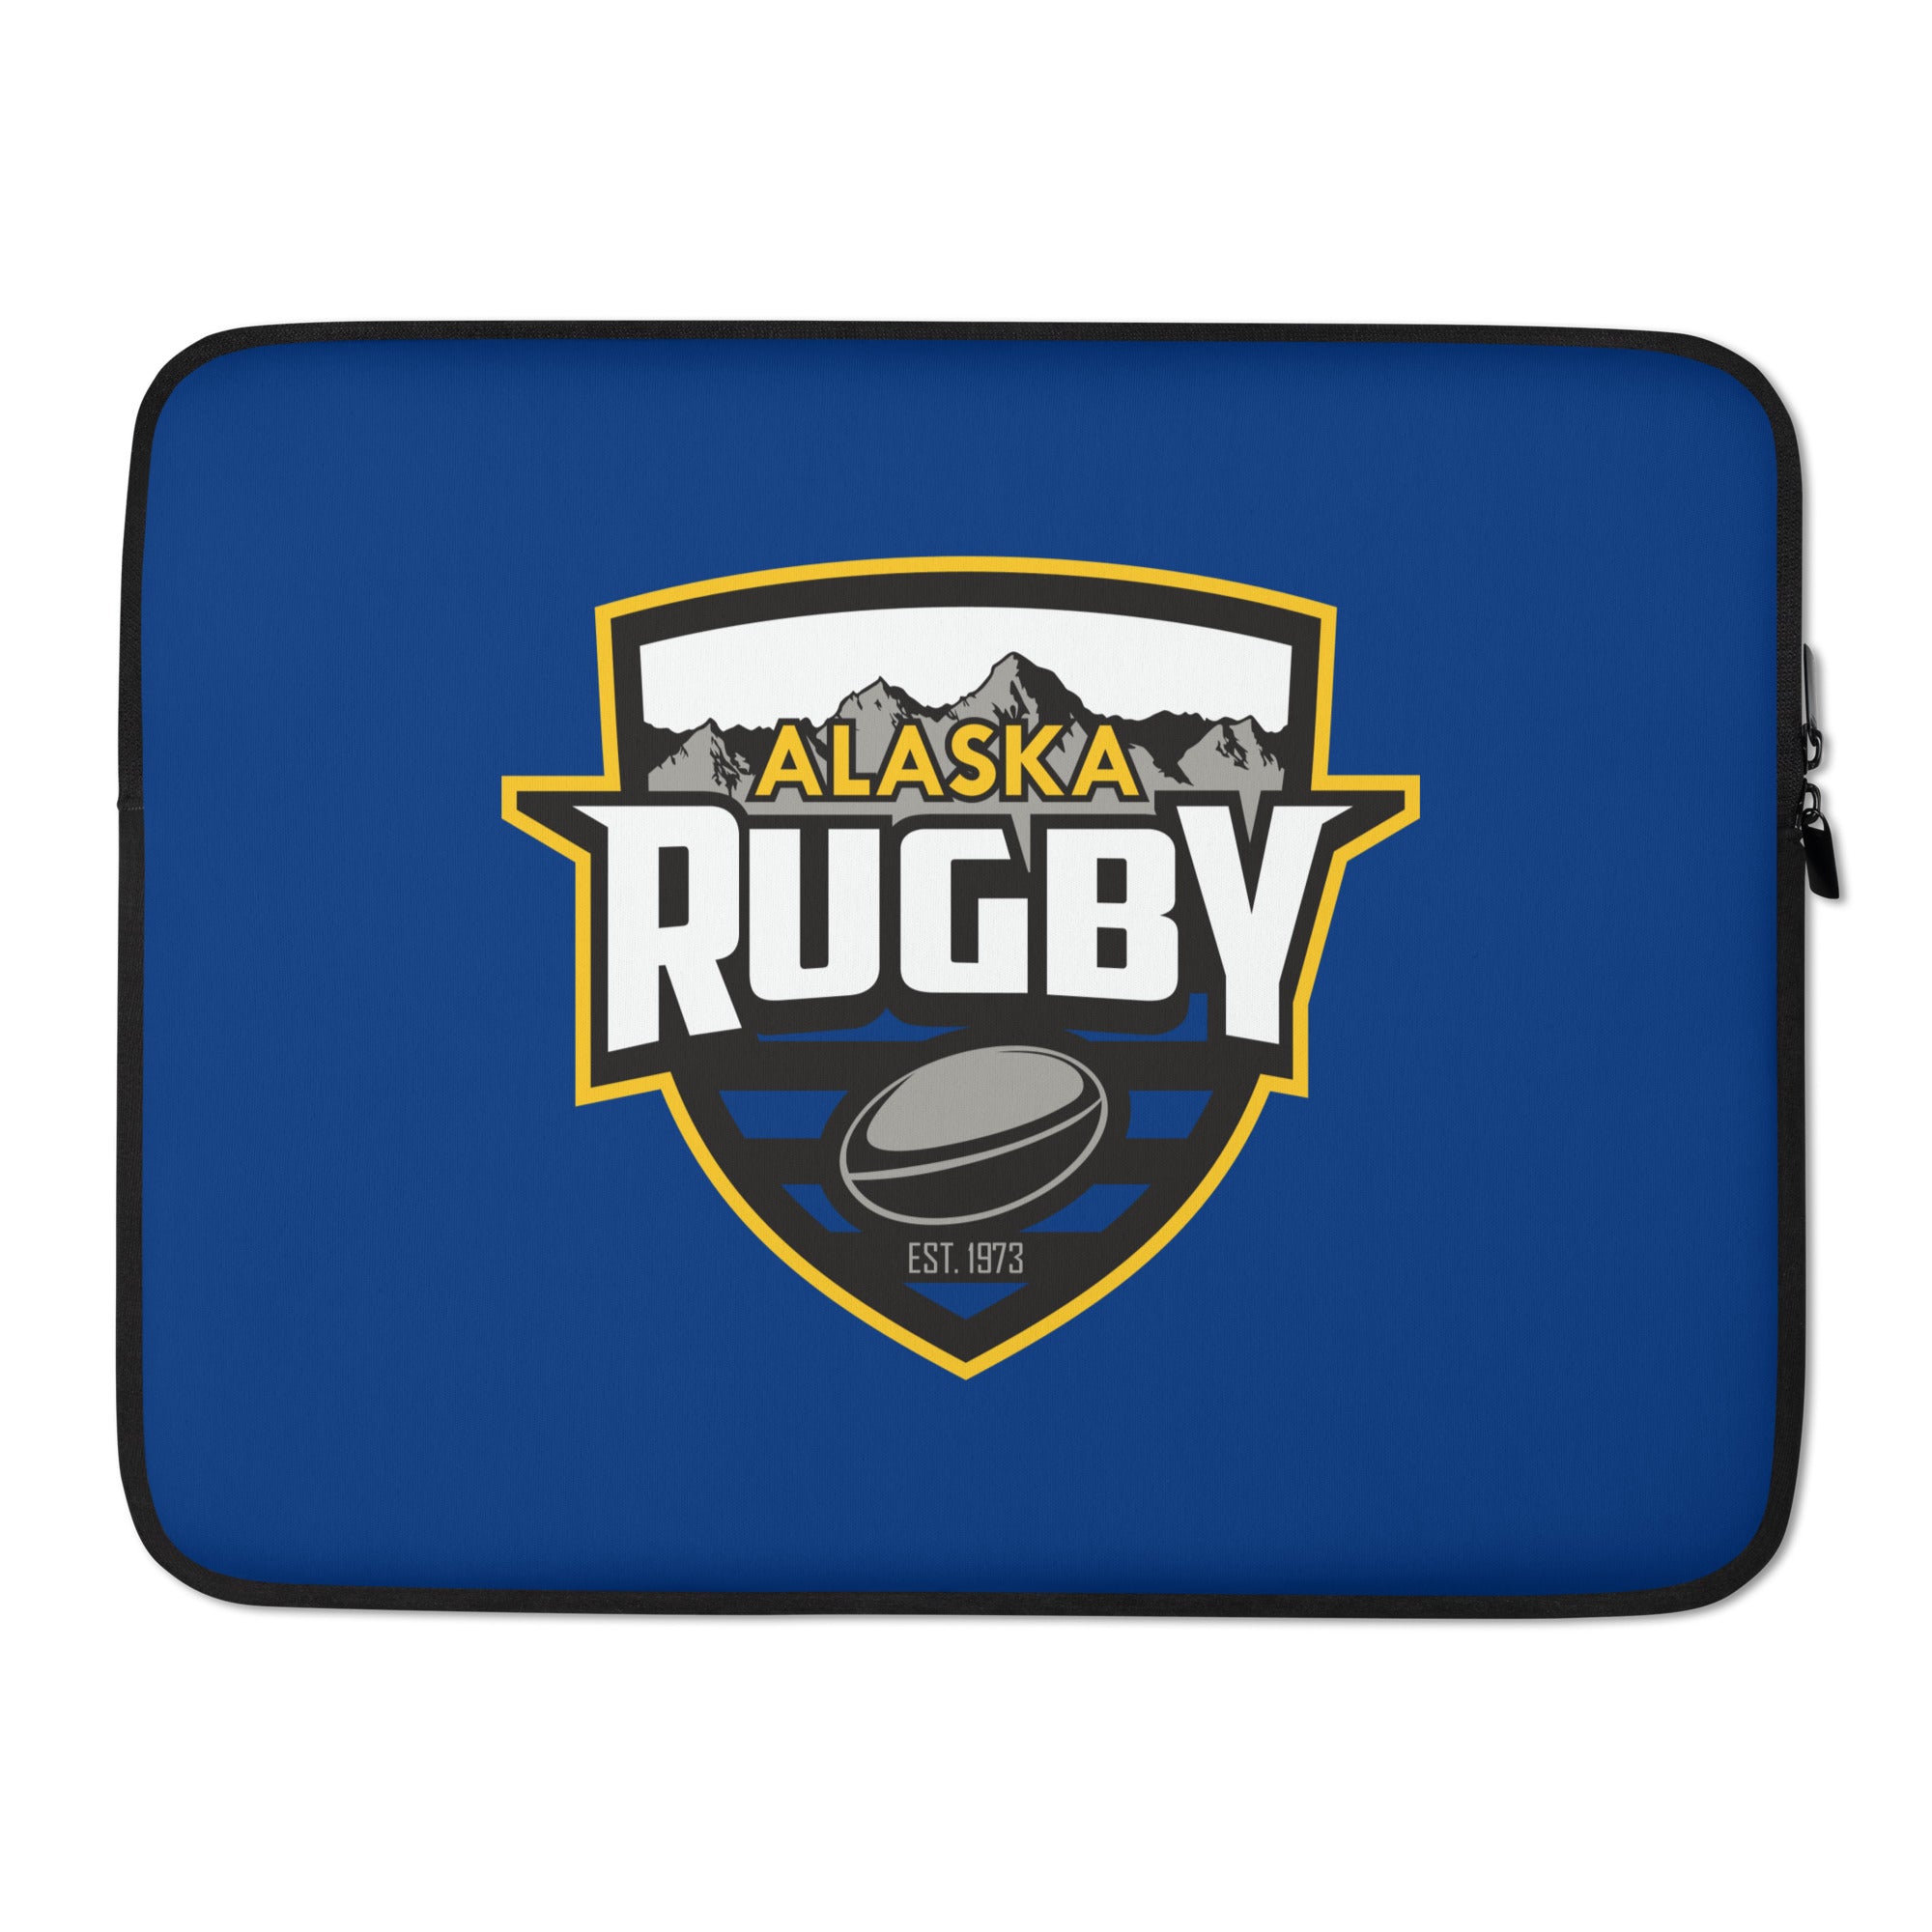 Rugby Imports Alaska Rugby Laptop Sleeve